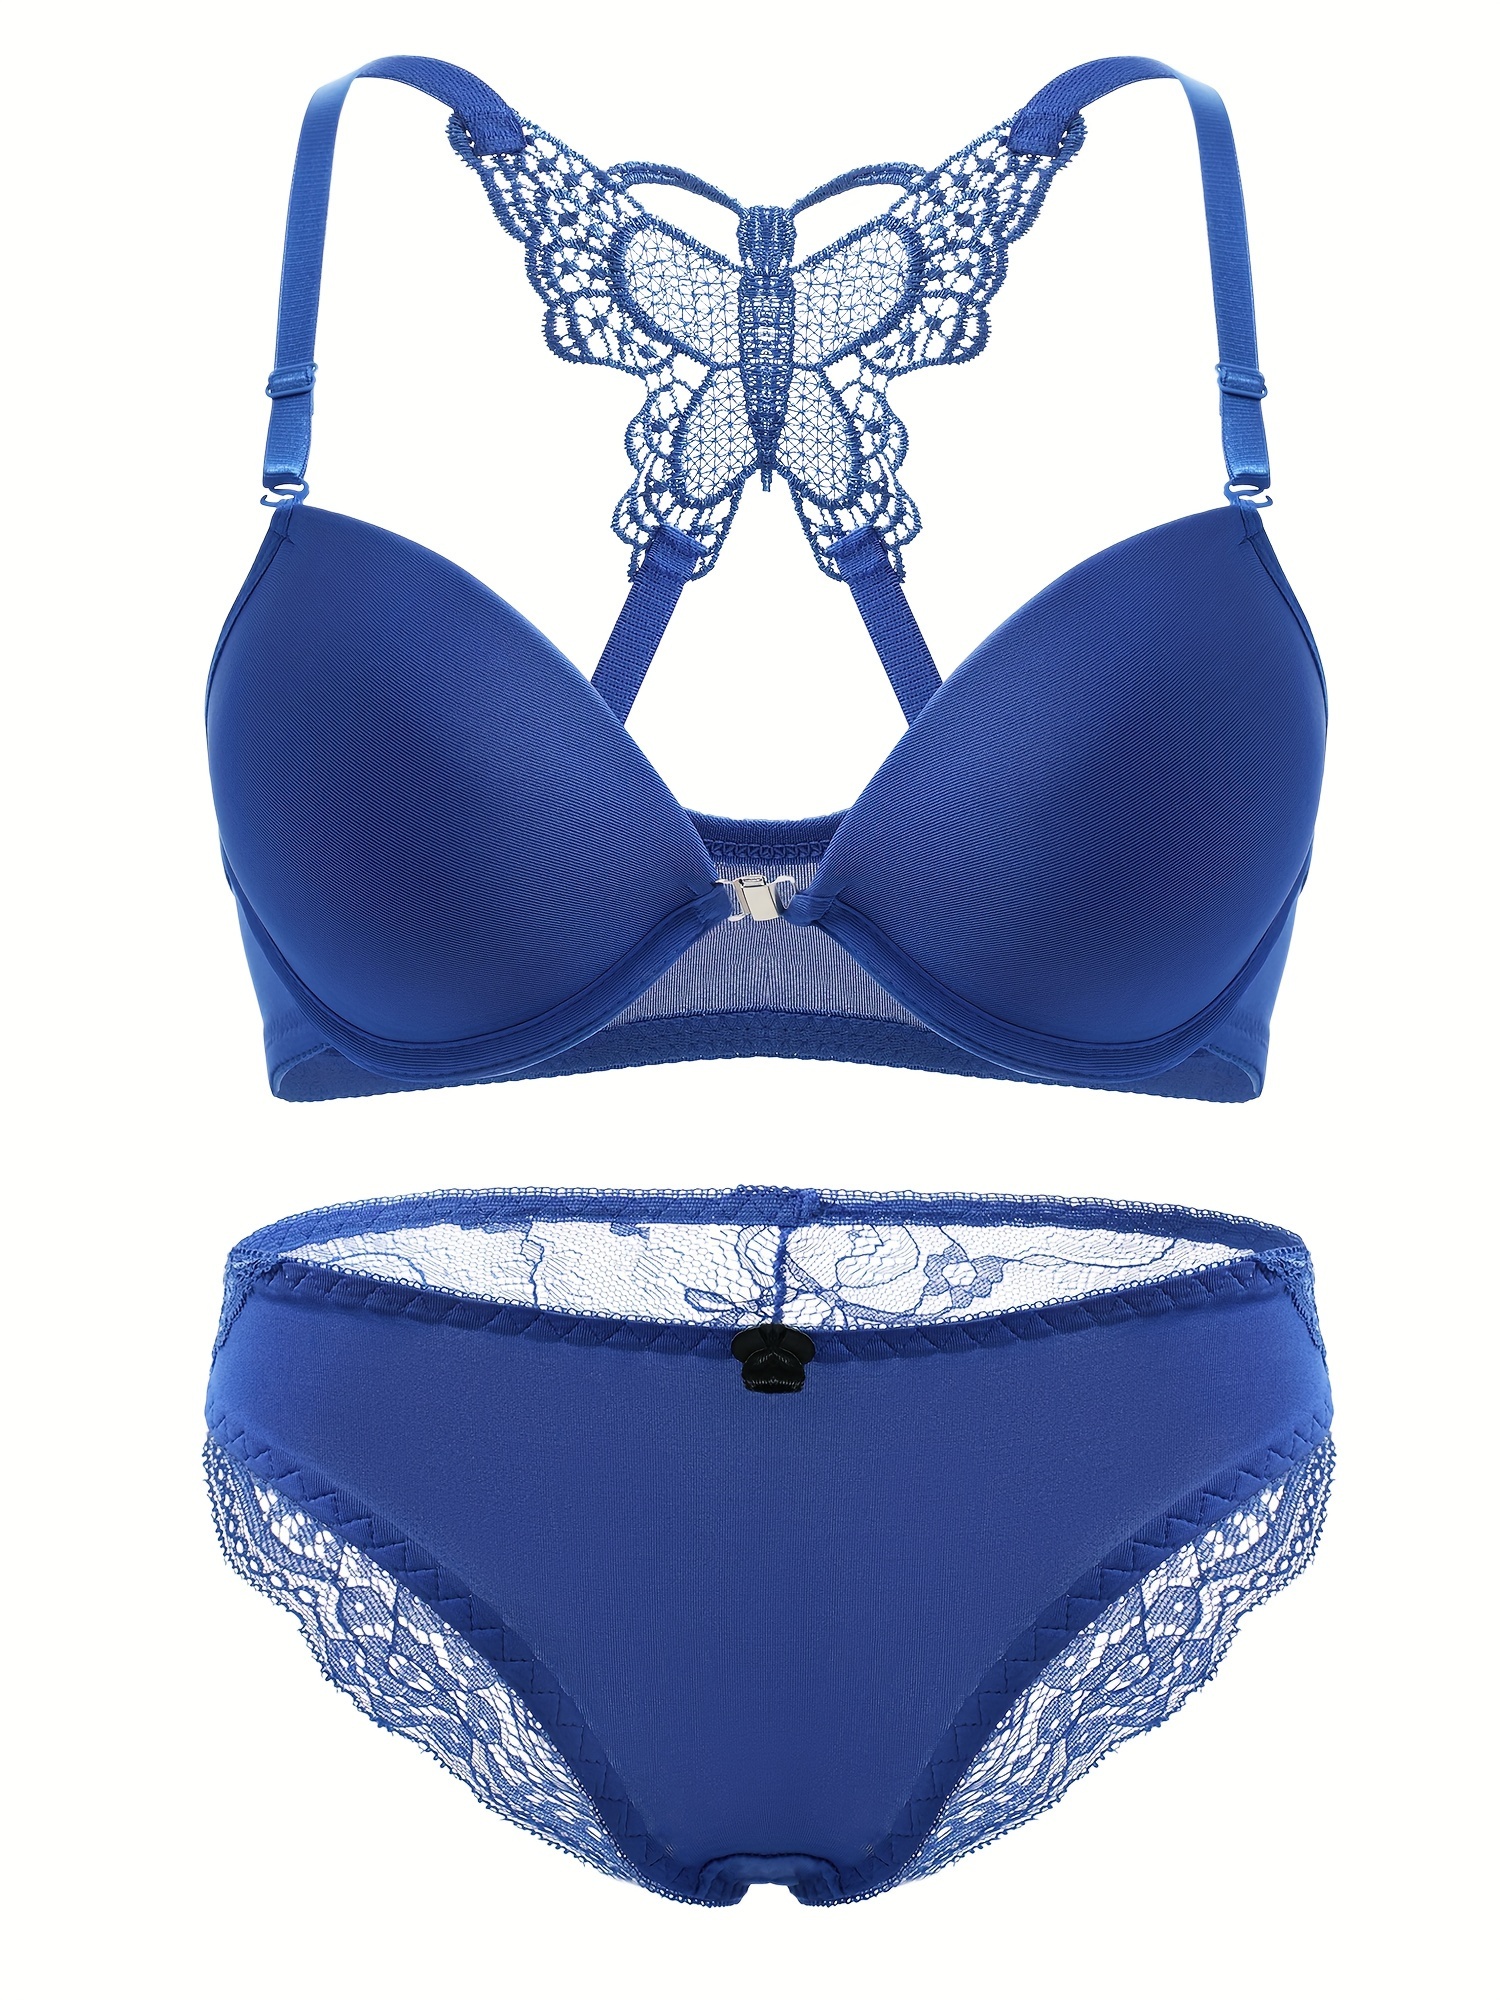 Contrast Lace Push Up Bra, Sexy Butterfly Embroidery Intimates Bra, Women's  Lingerie & Underwear